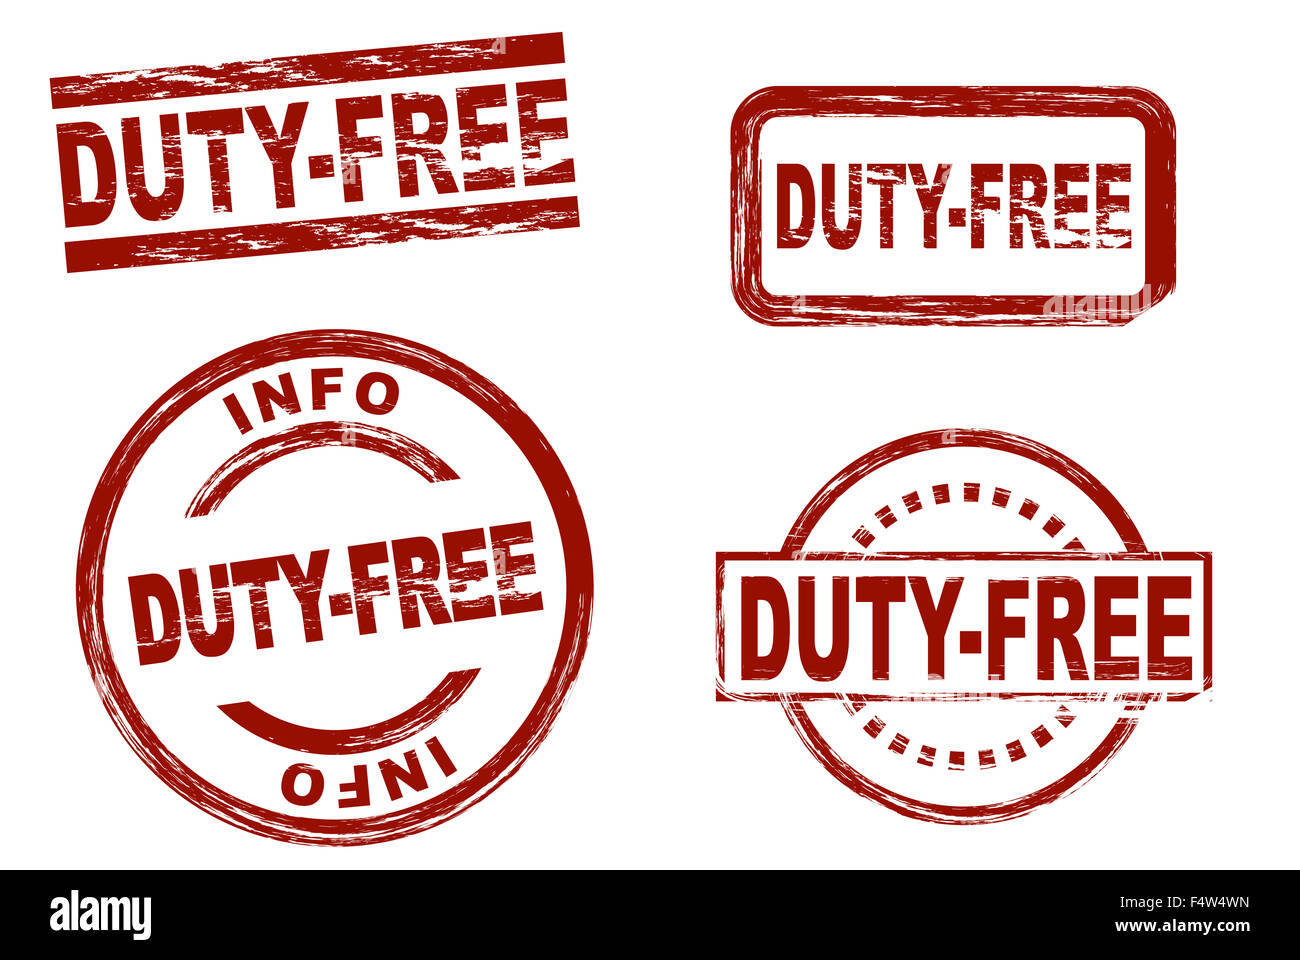 Set of stylized red stamps showing the term duty-free. All on white background. Stock Photo